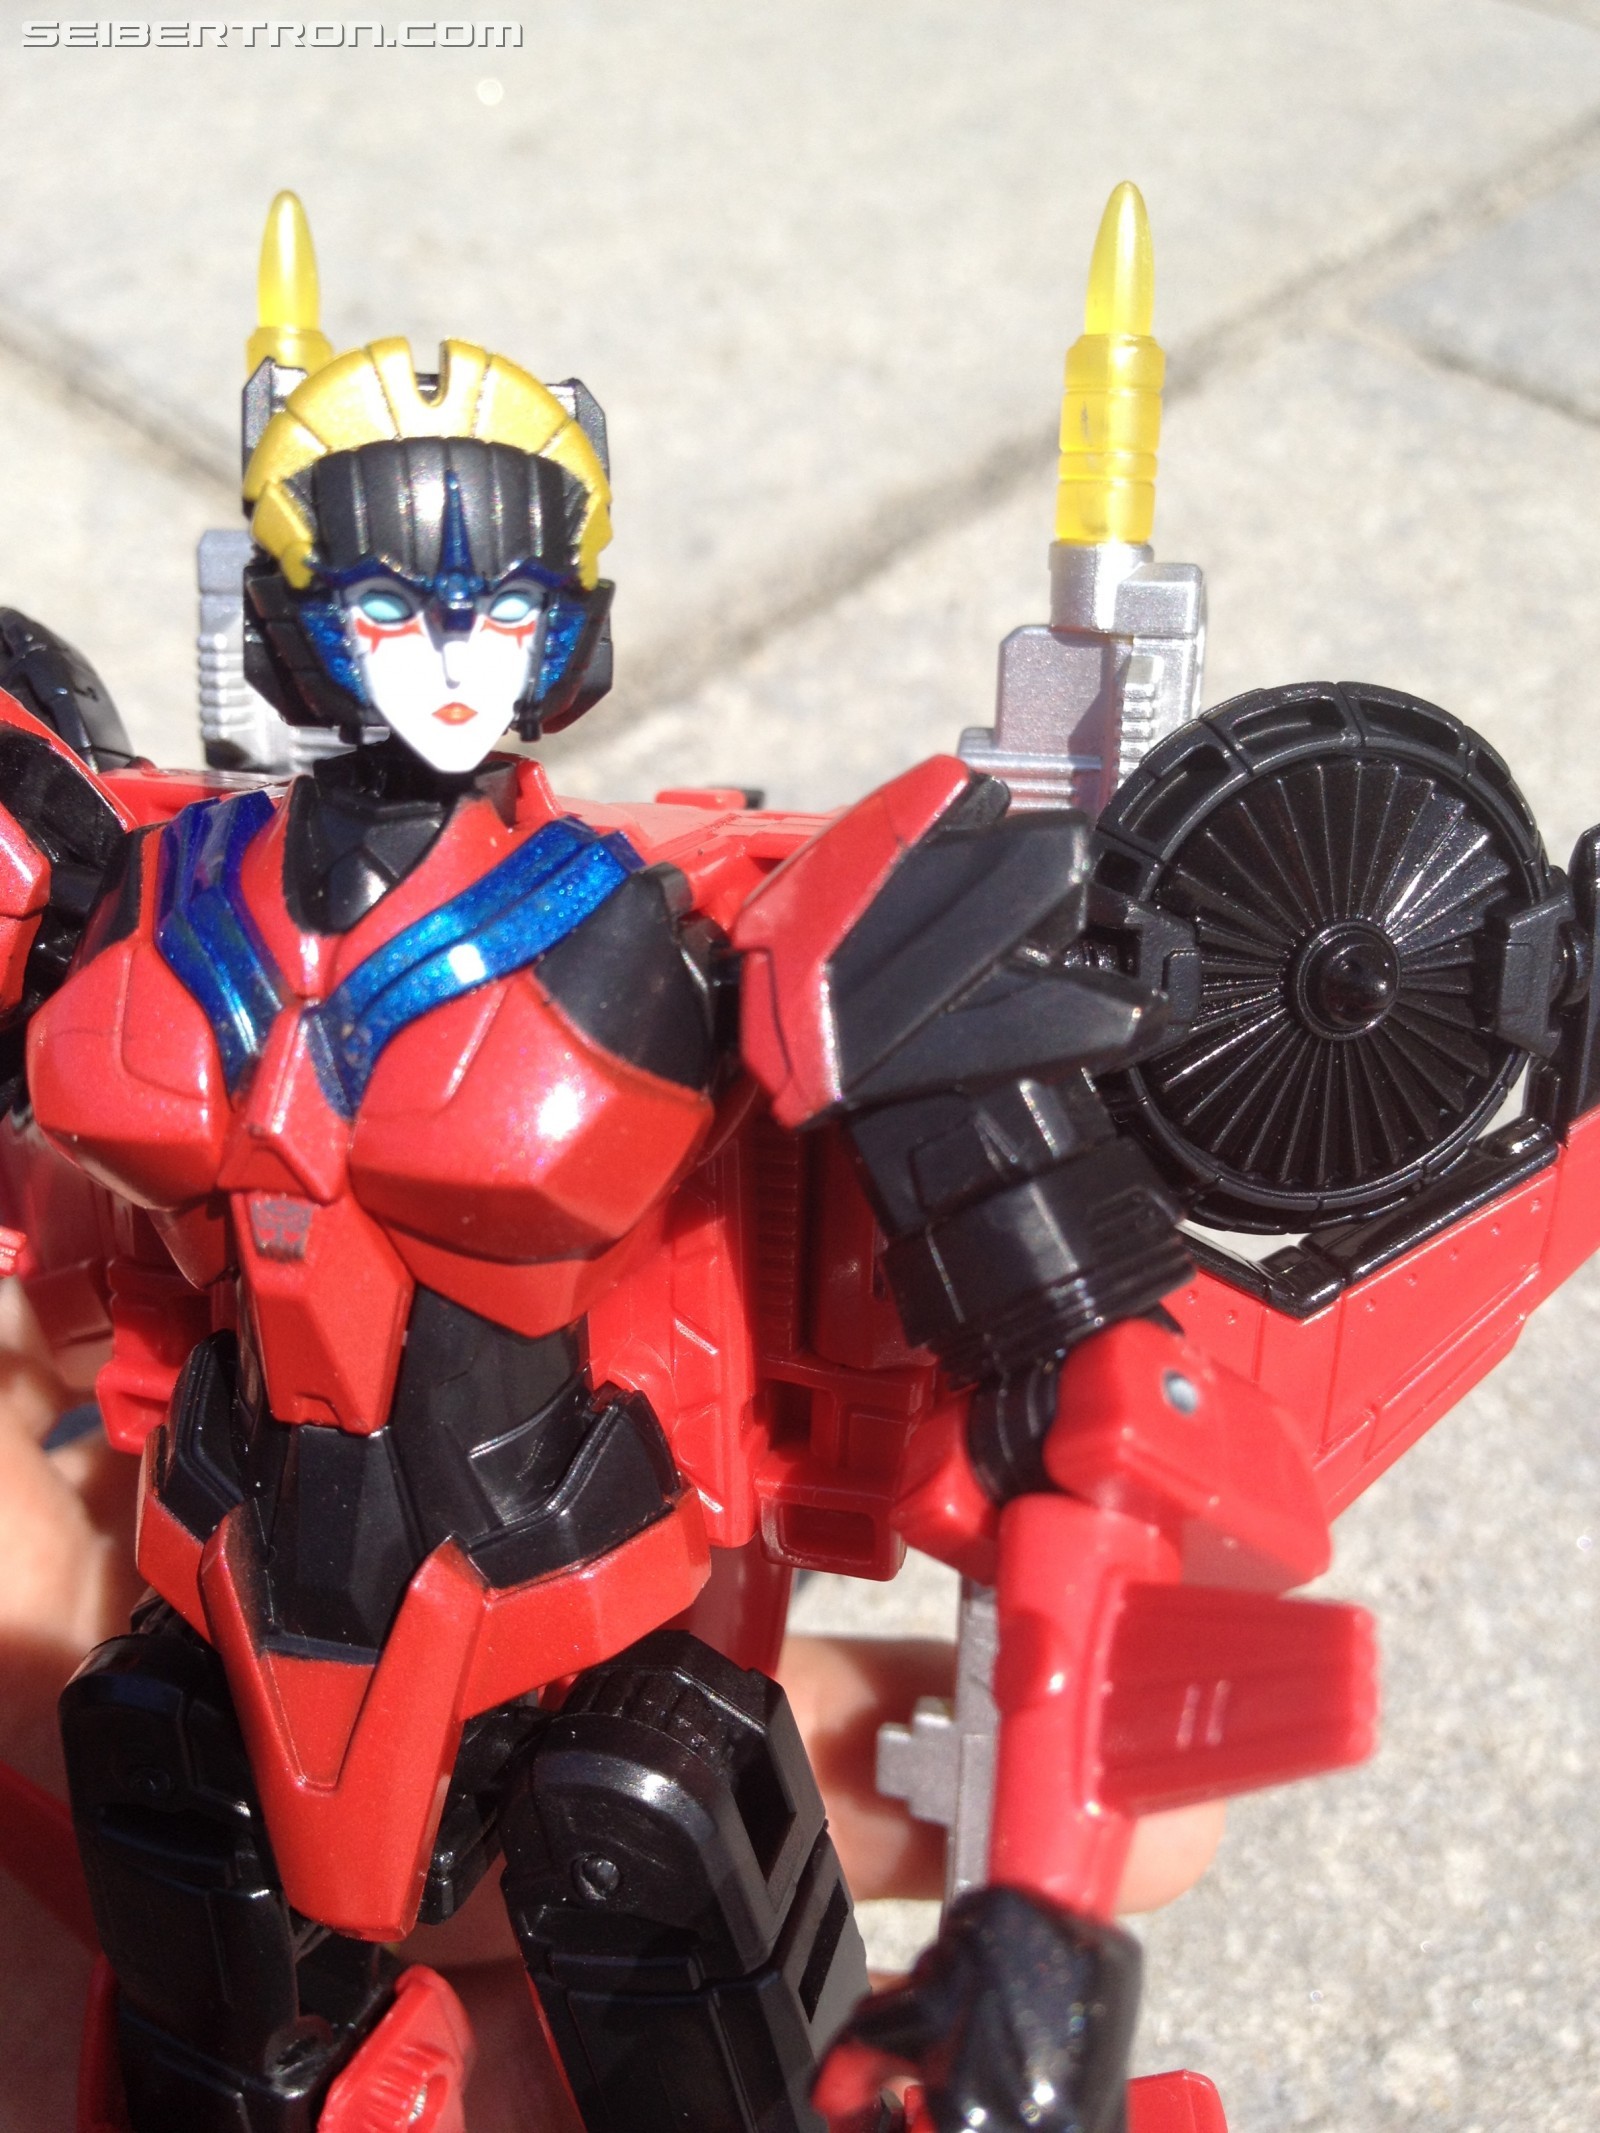 Transformers News: Pictorial Review of Transformers Titans Return Windblade